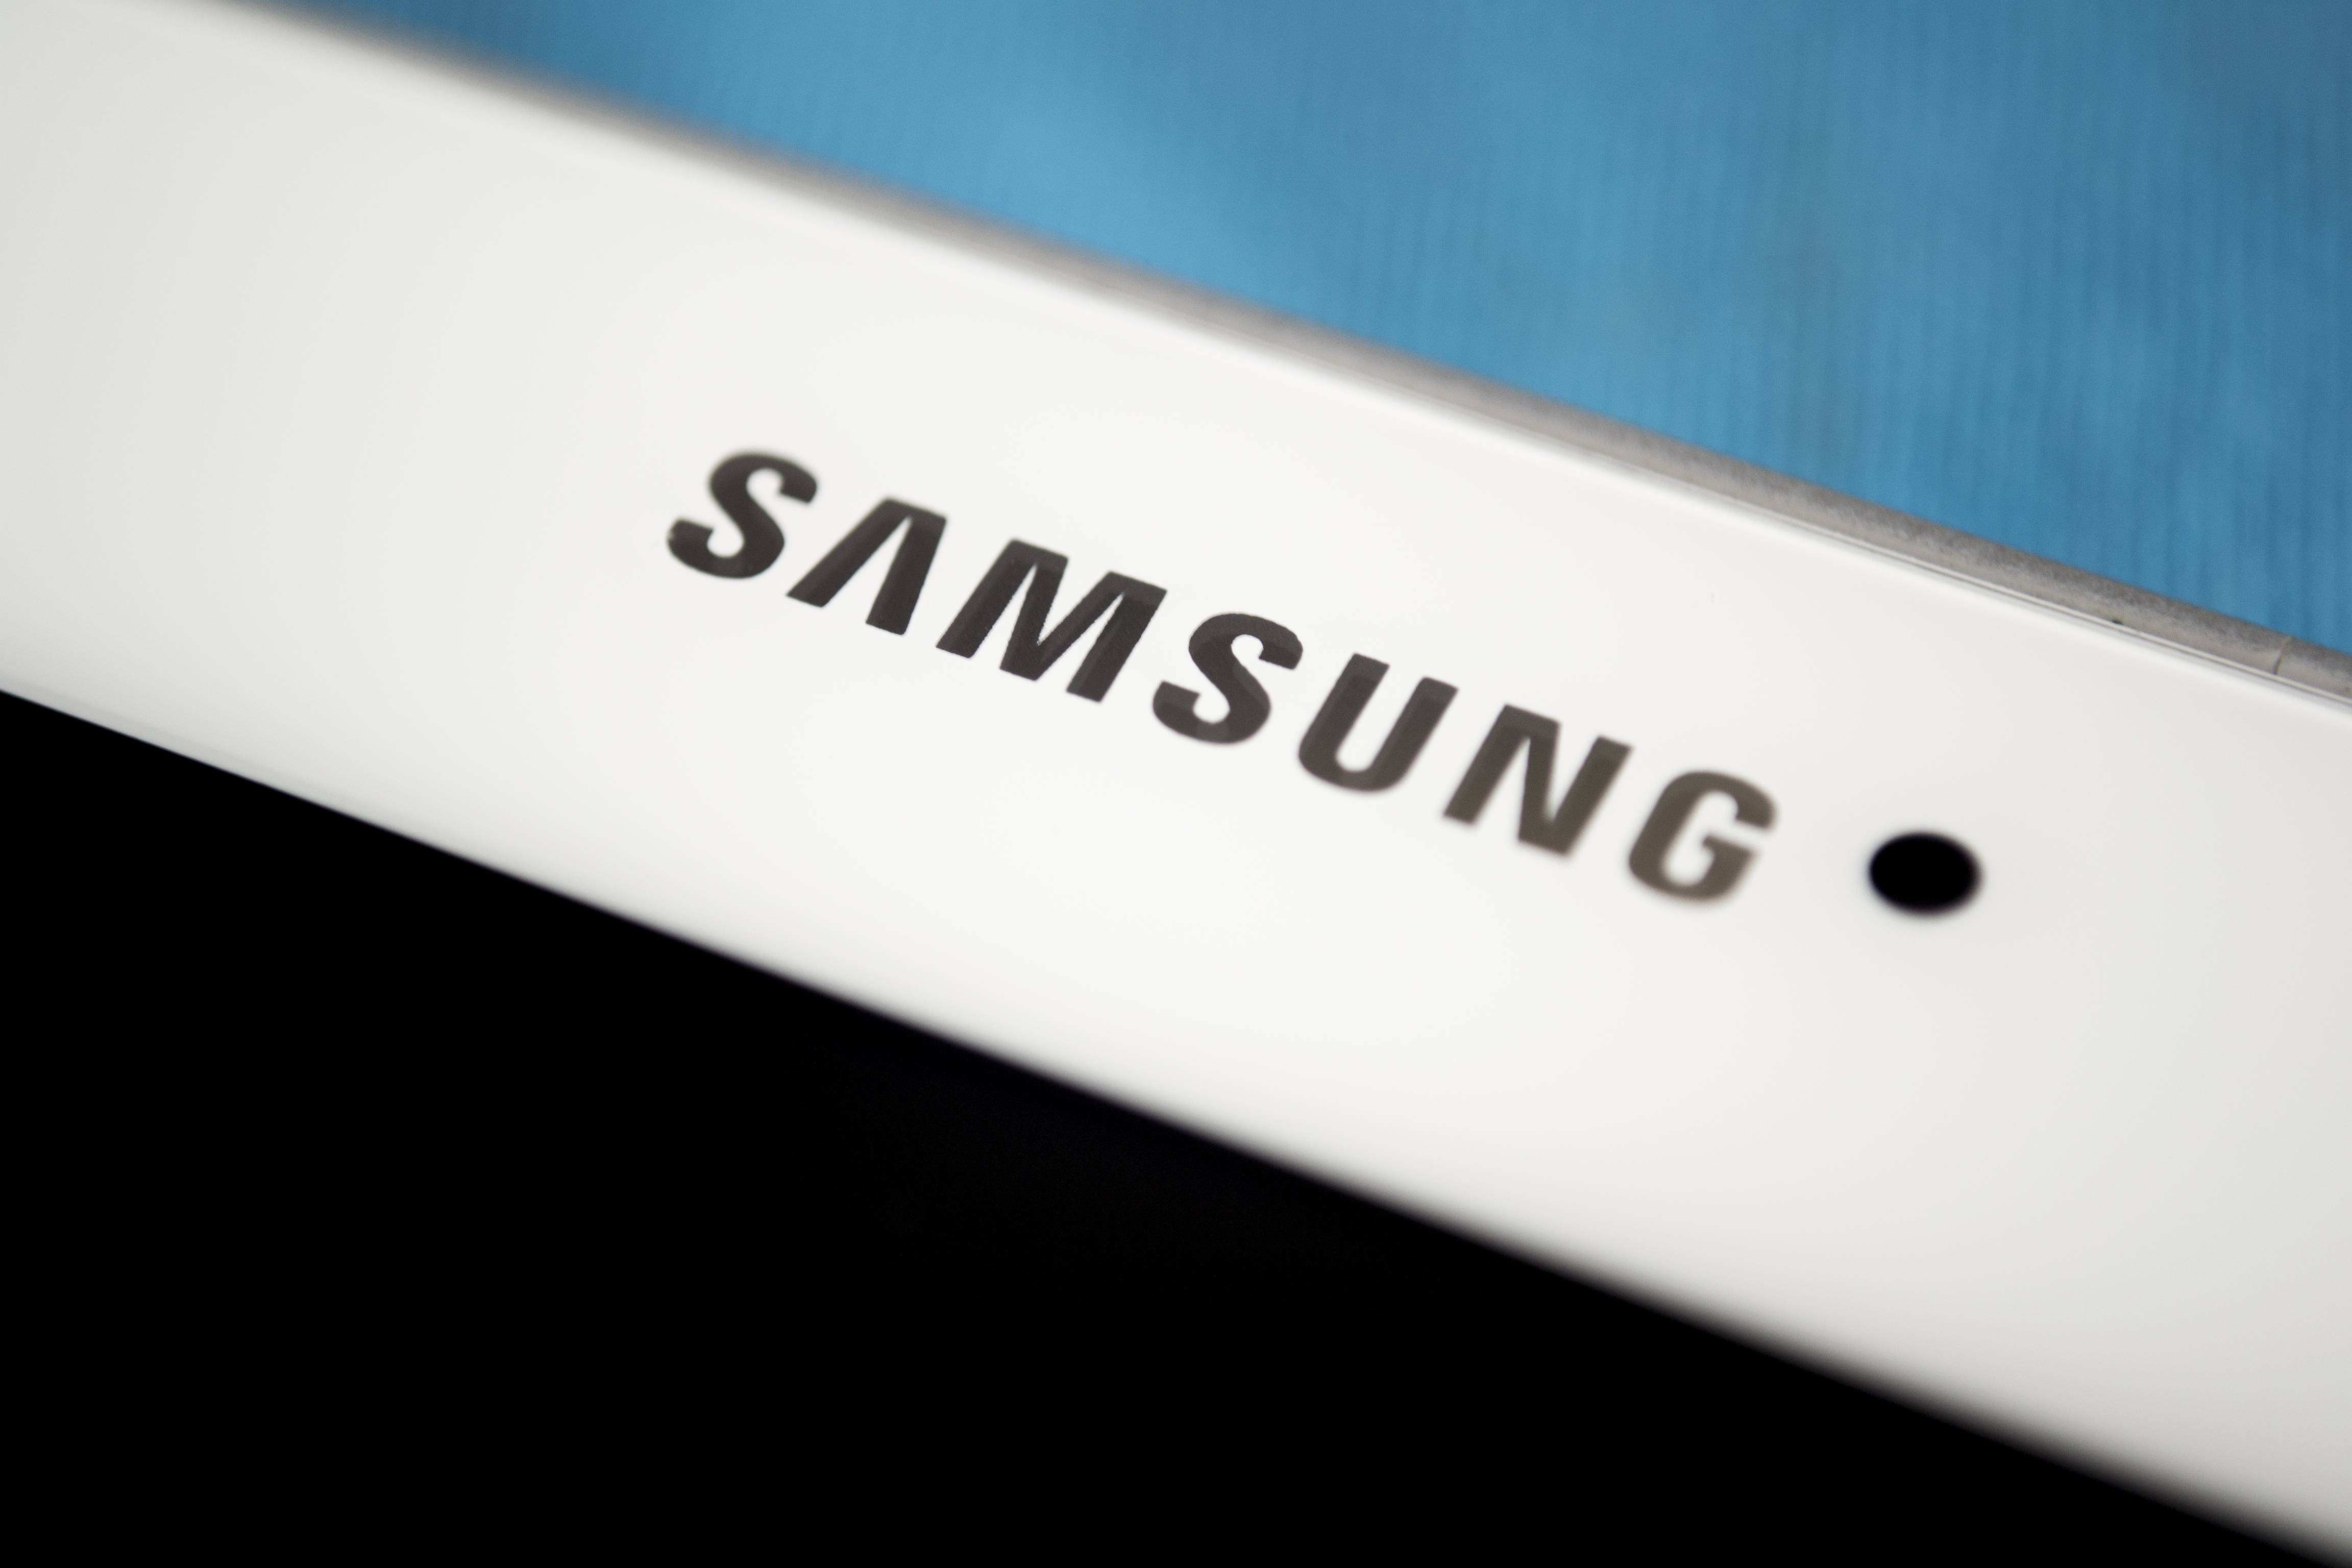 Cool Samsung Logo - samsung logo images hd wallpapers high definition amazing cool apple ...